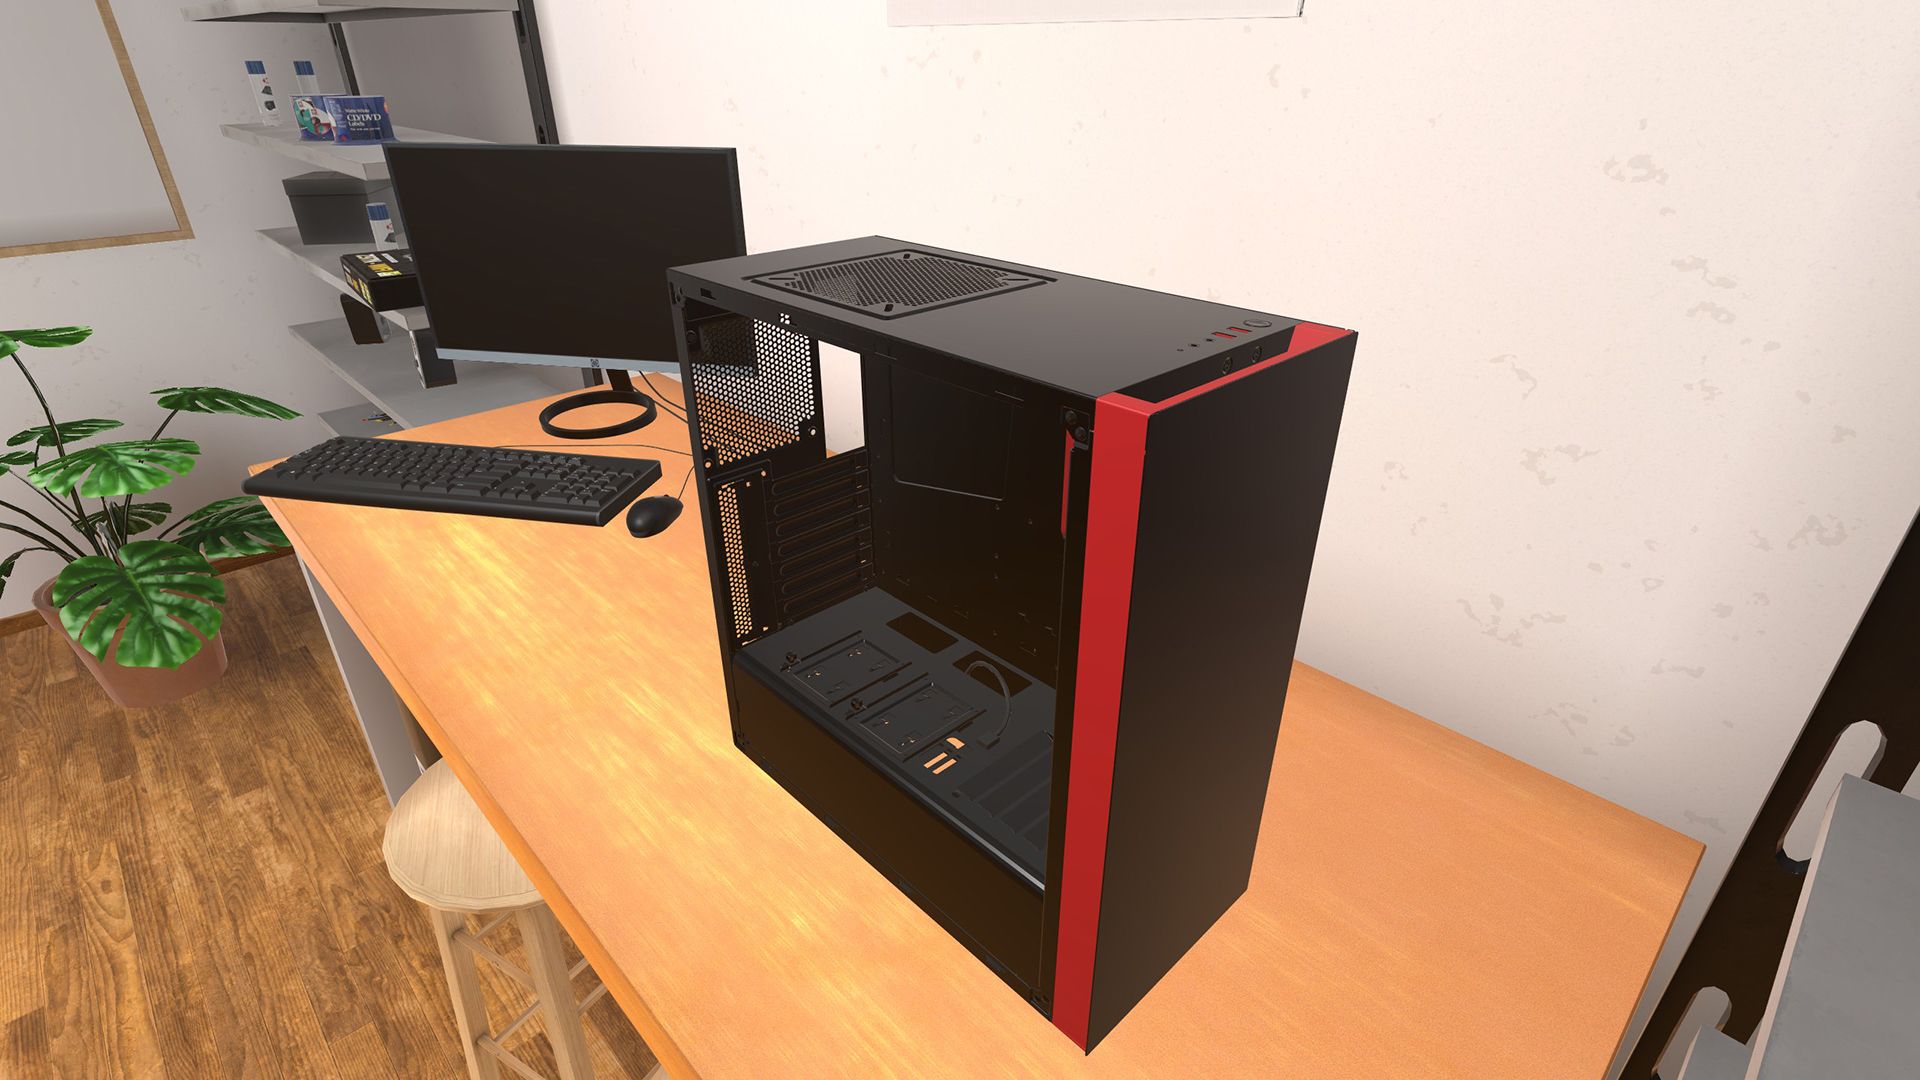 Build a gaming PC in a game with PC Building Simulator